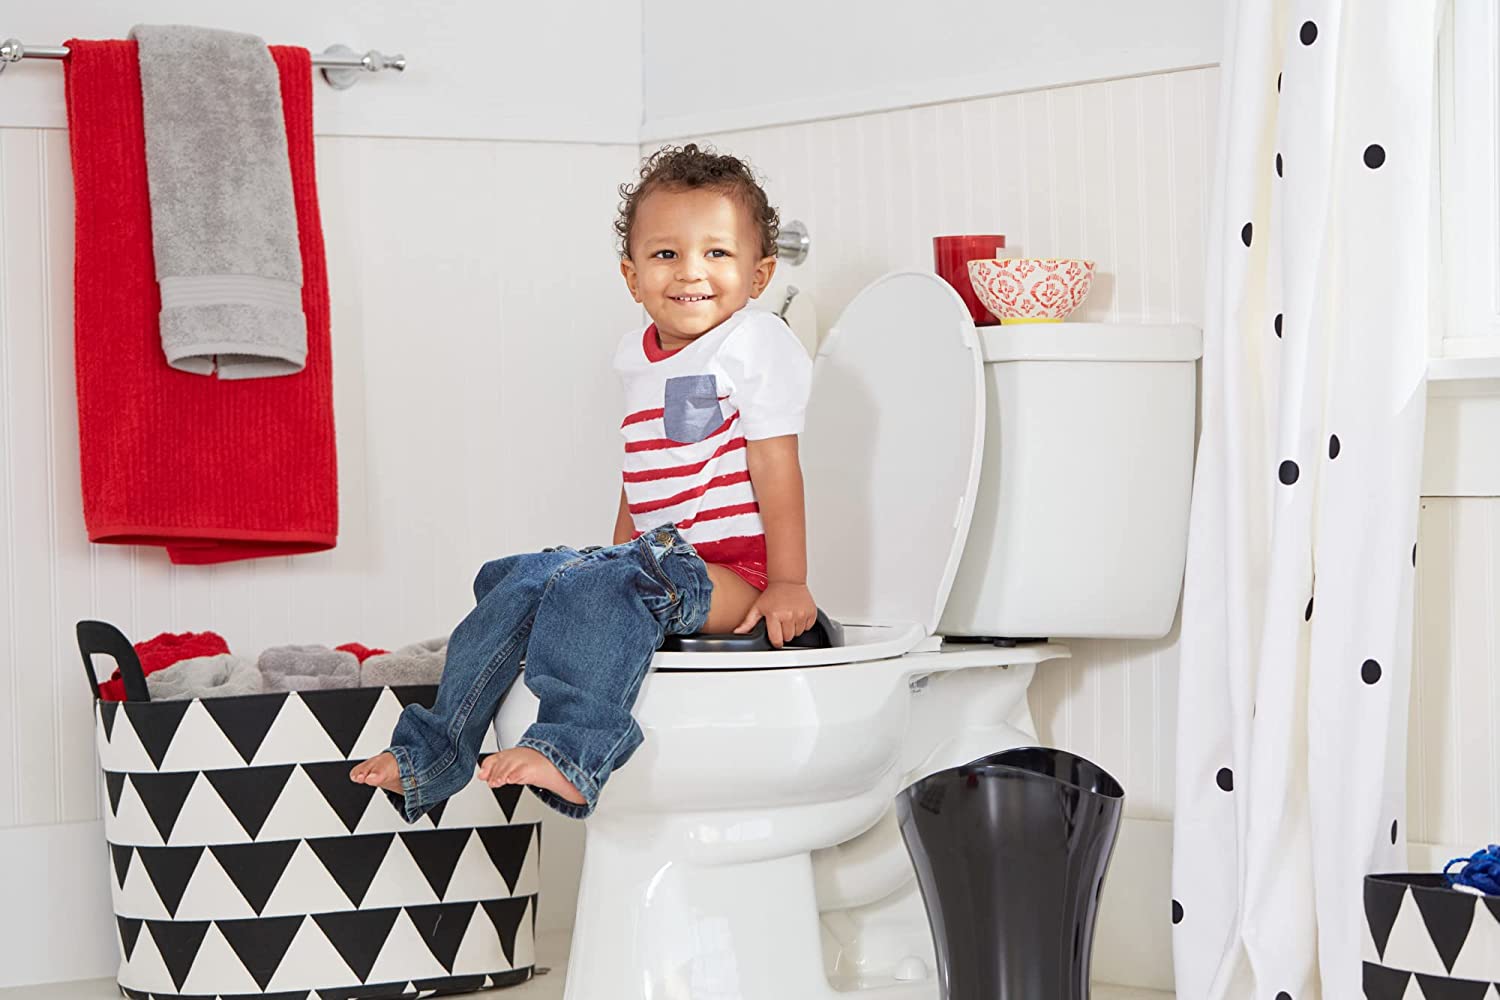 The First Years Training Wheels Racer Potty Training Toilet - Race Car Training Potty - Includes Detachable Toddler Toilet Seat and Kids Potty - Ages 18 Months and Up 1 Count (Pack of 1) Car - image 3 of 7